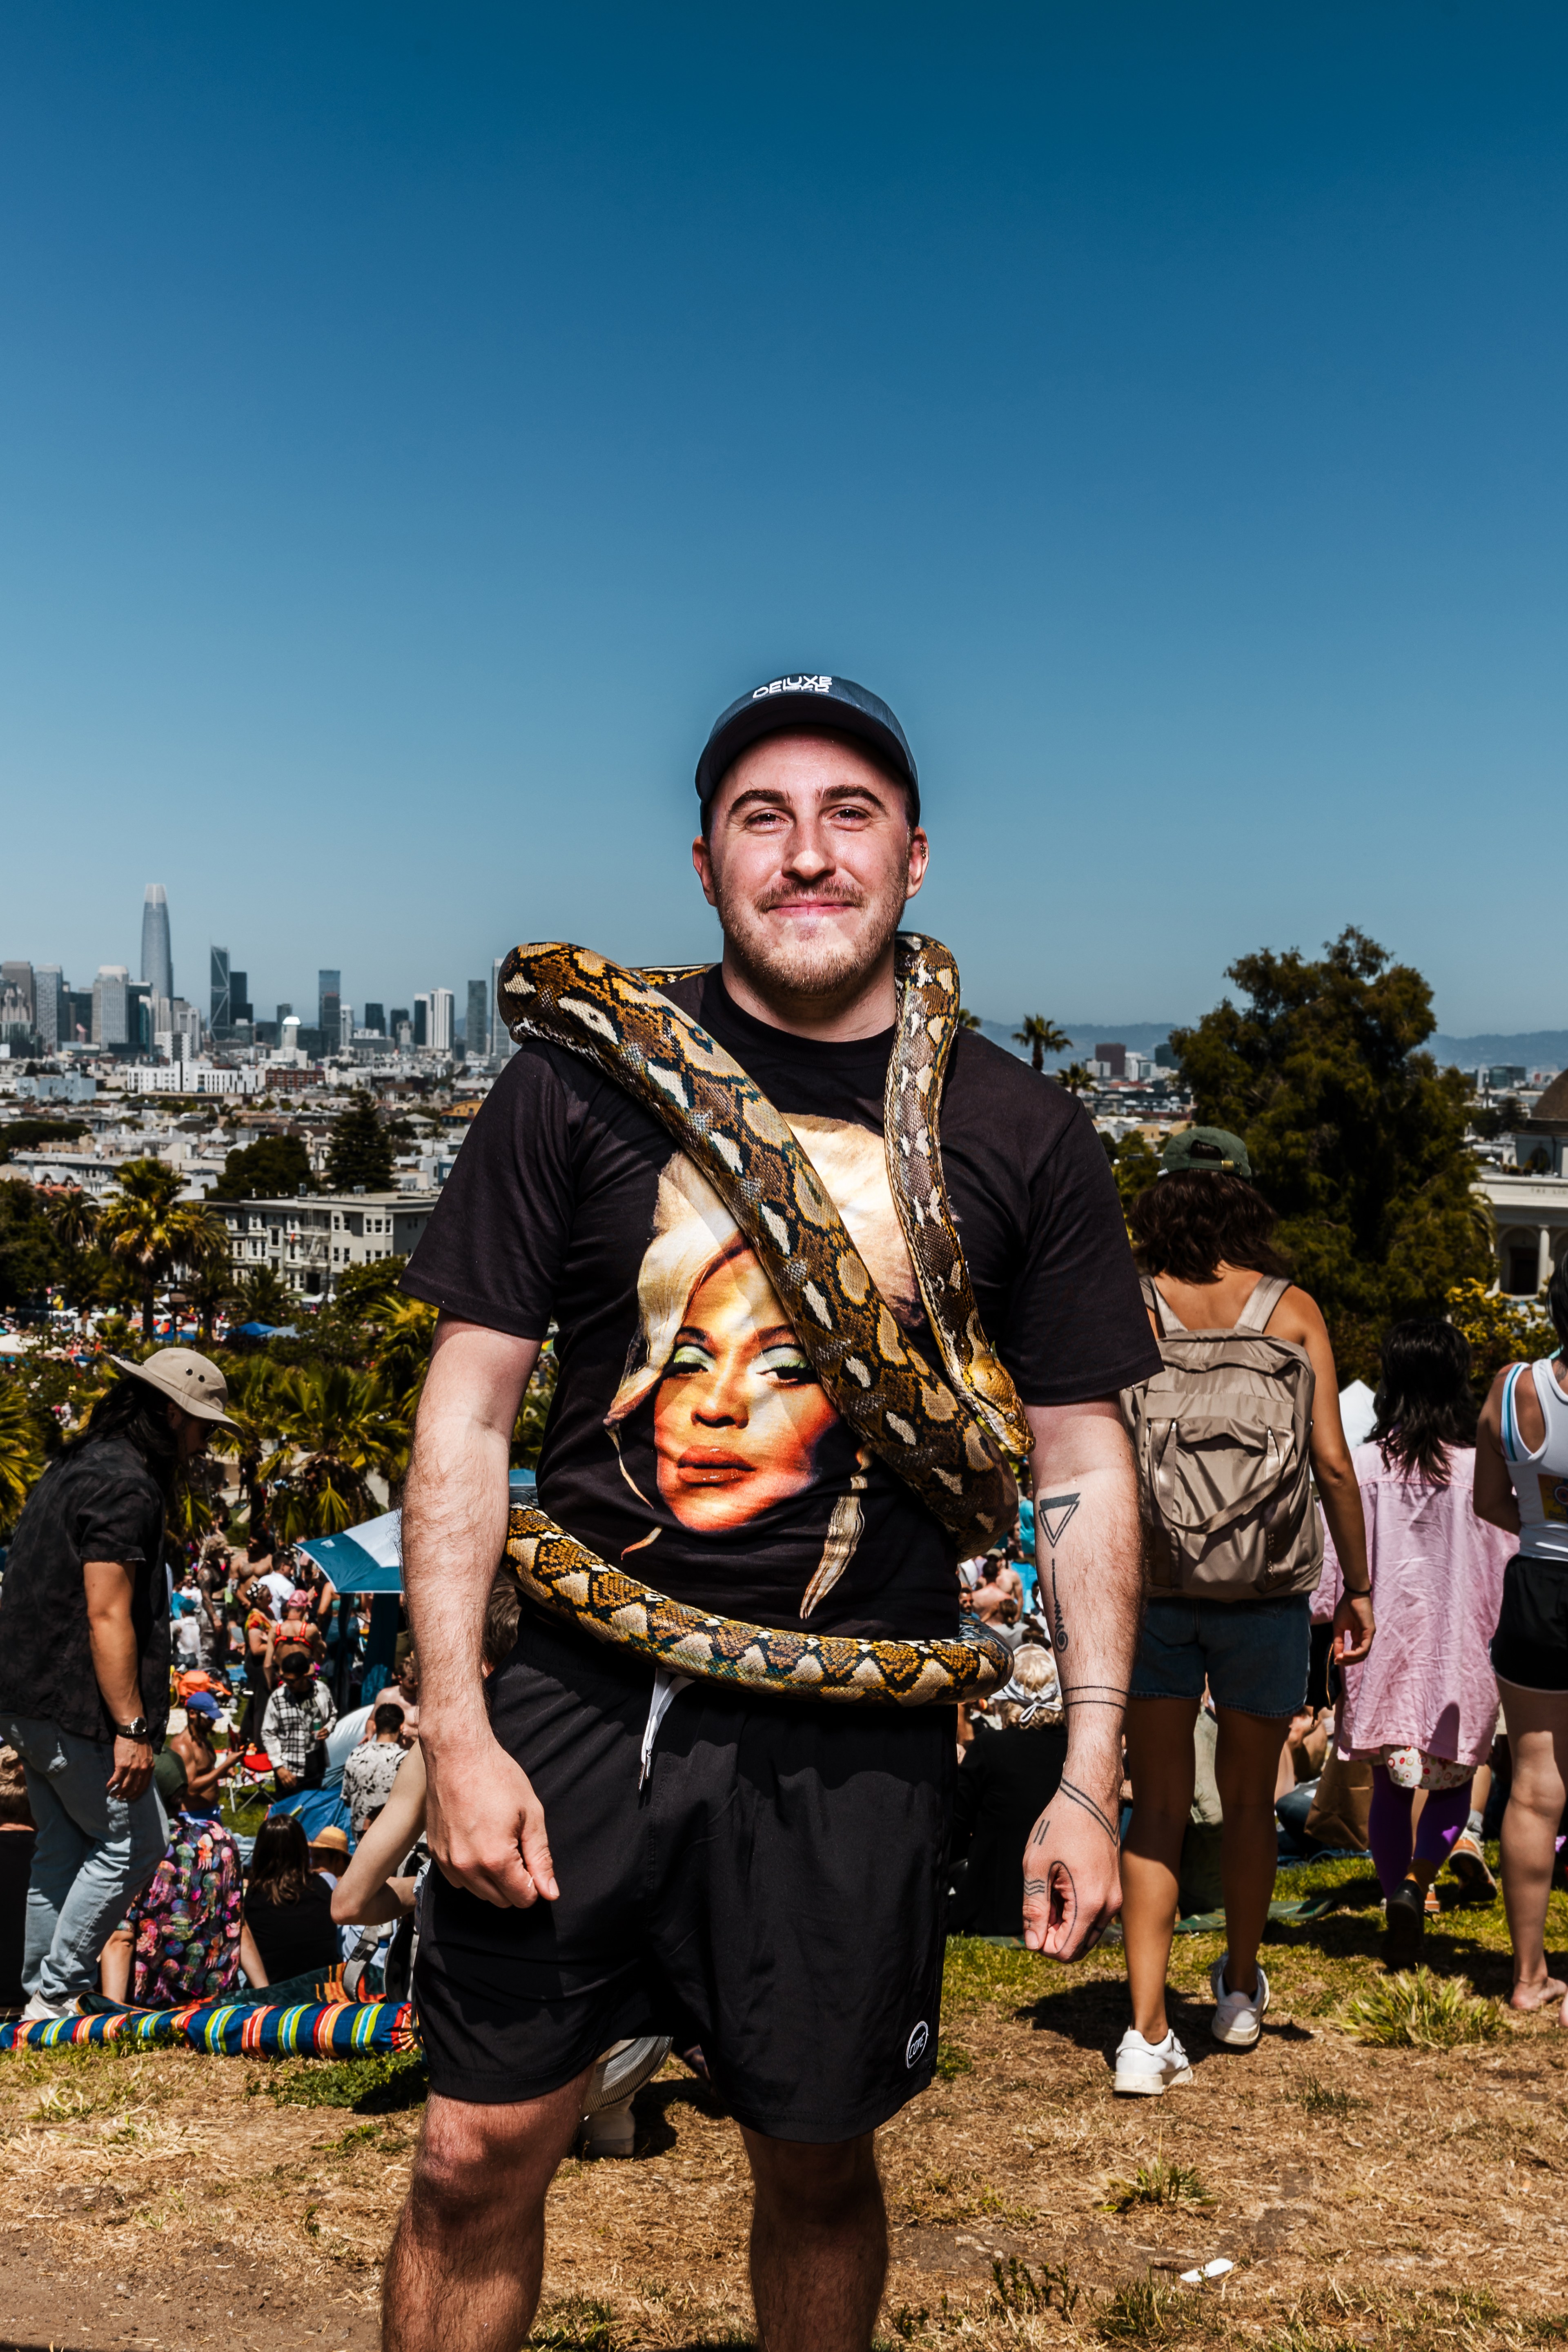 A man stands outdoors with a large snake draped over his shoulders. He wears a hat and a printed black t-shirt. People are gathered in a park under a clear sky.